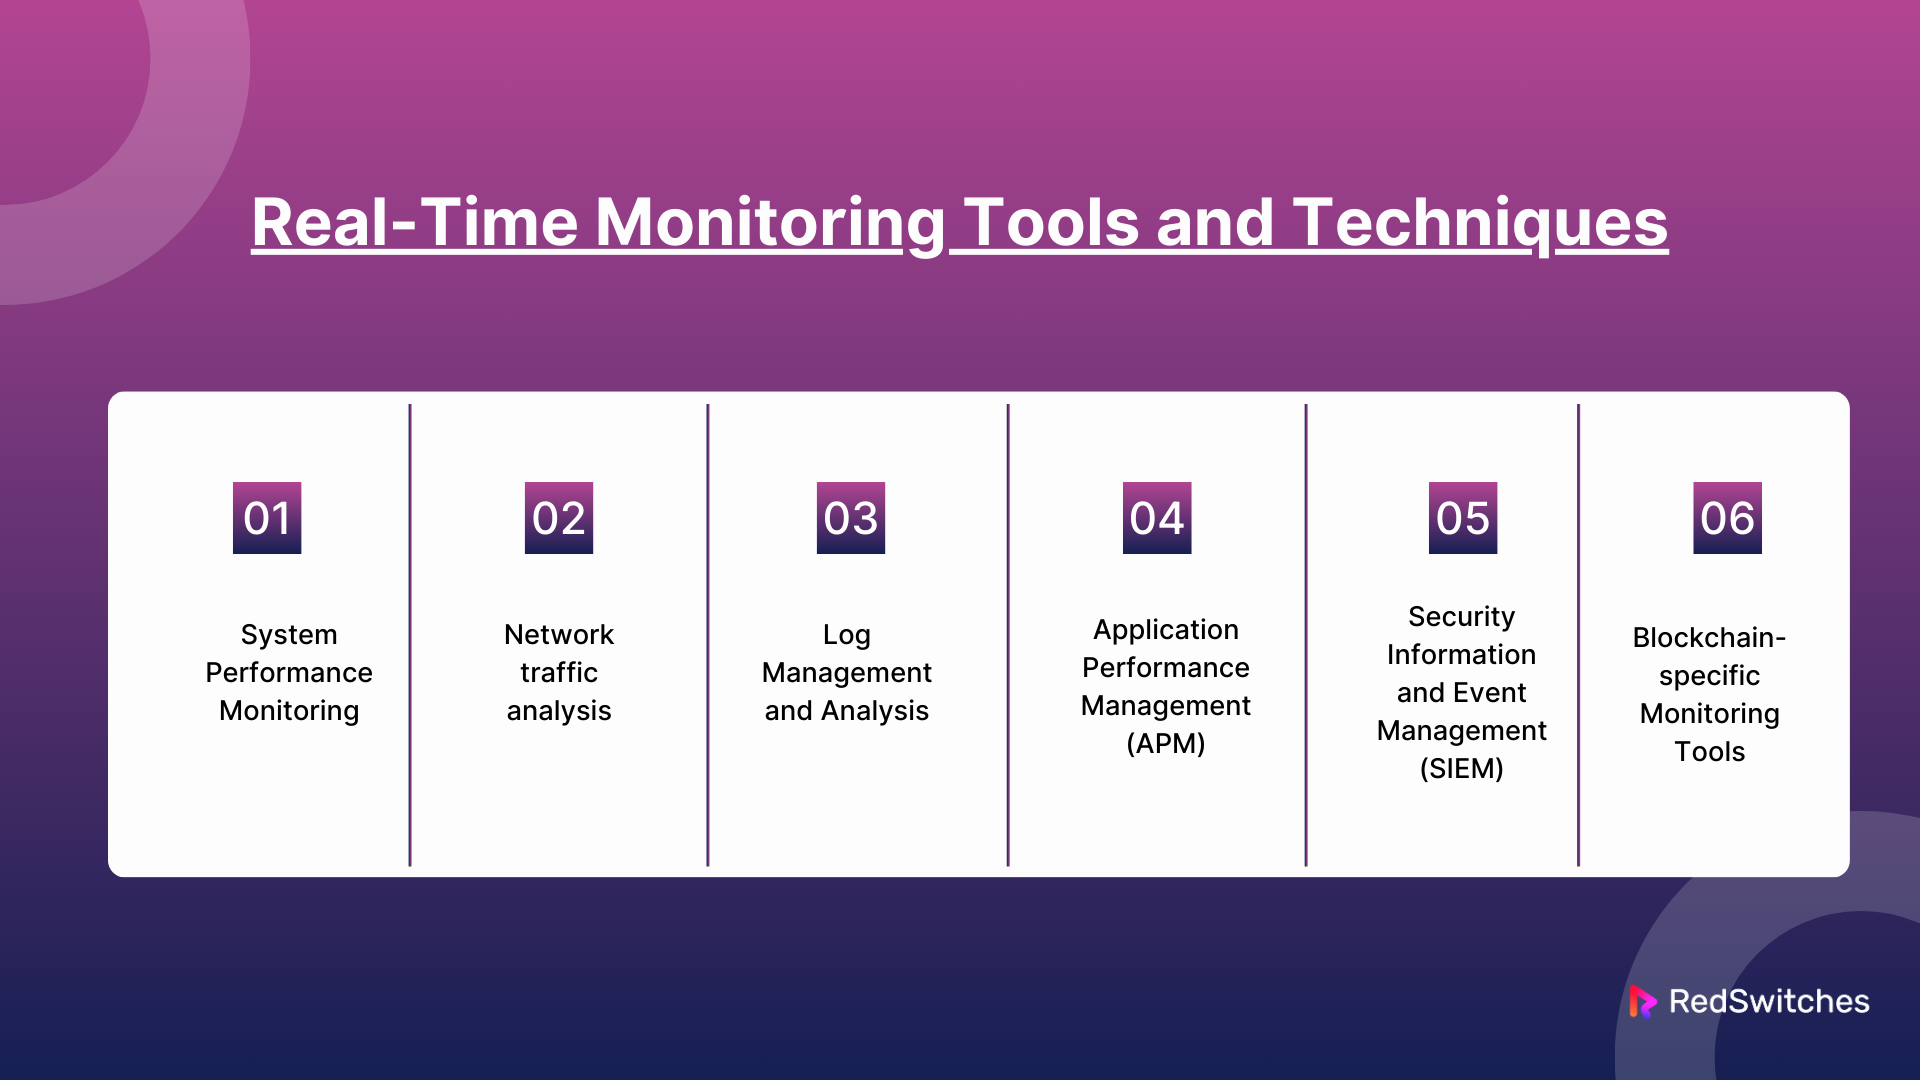 Real-Time Monitoring Tools and Techniques